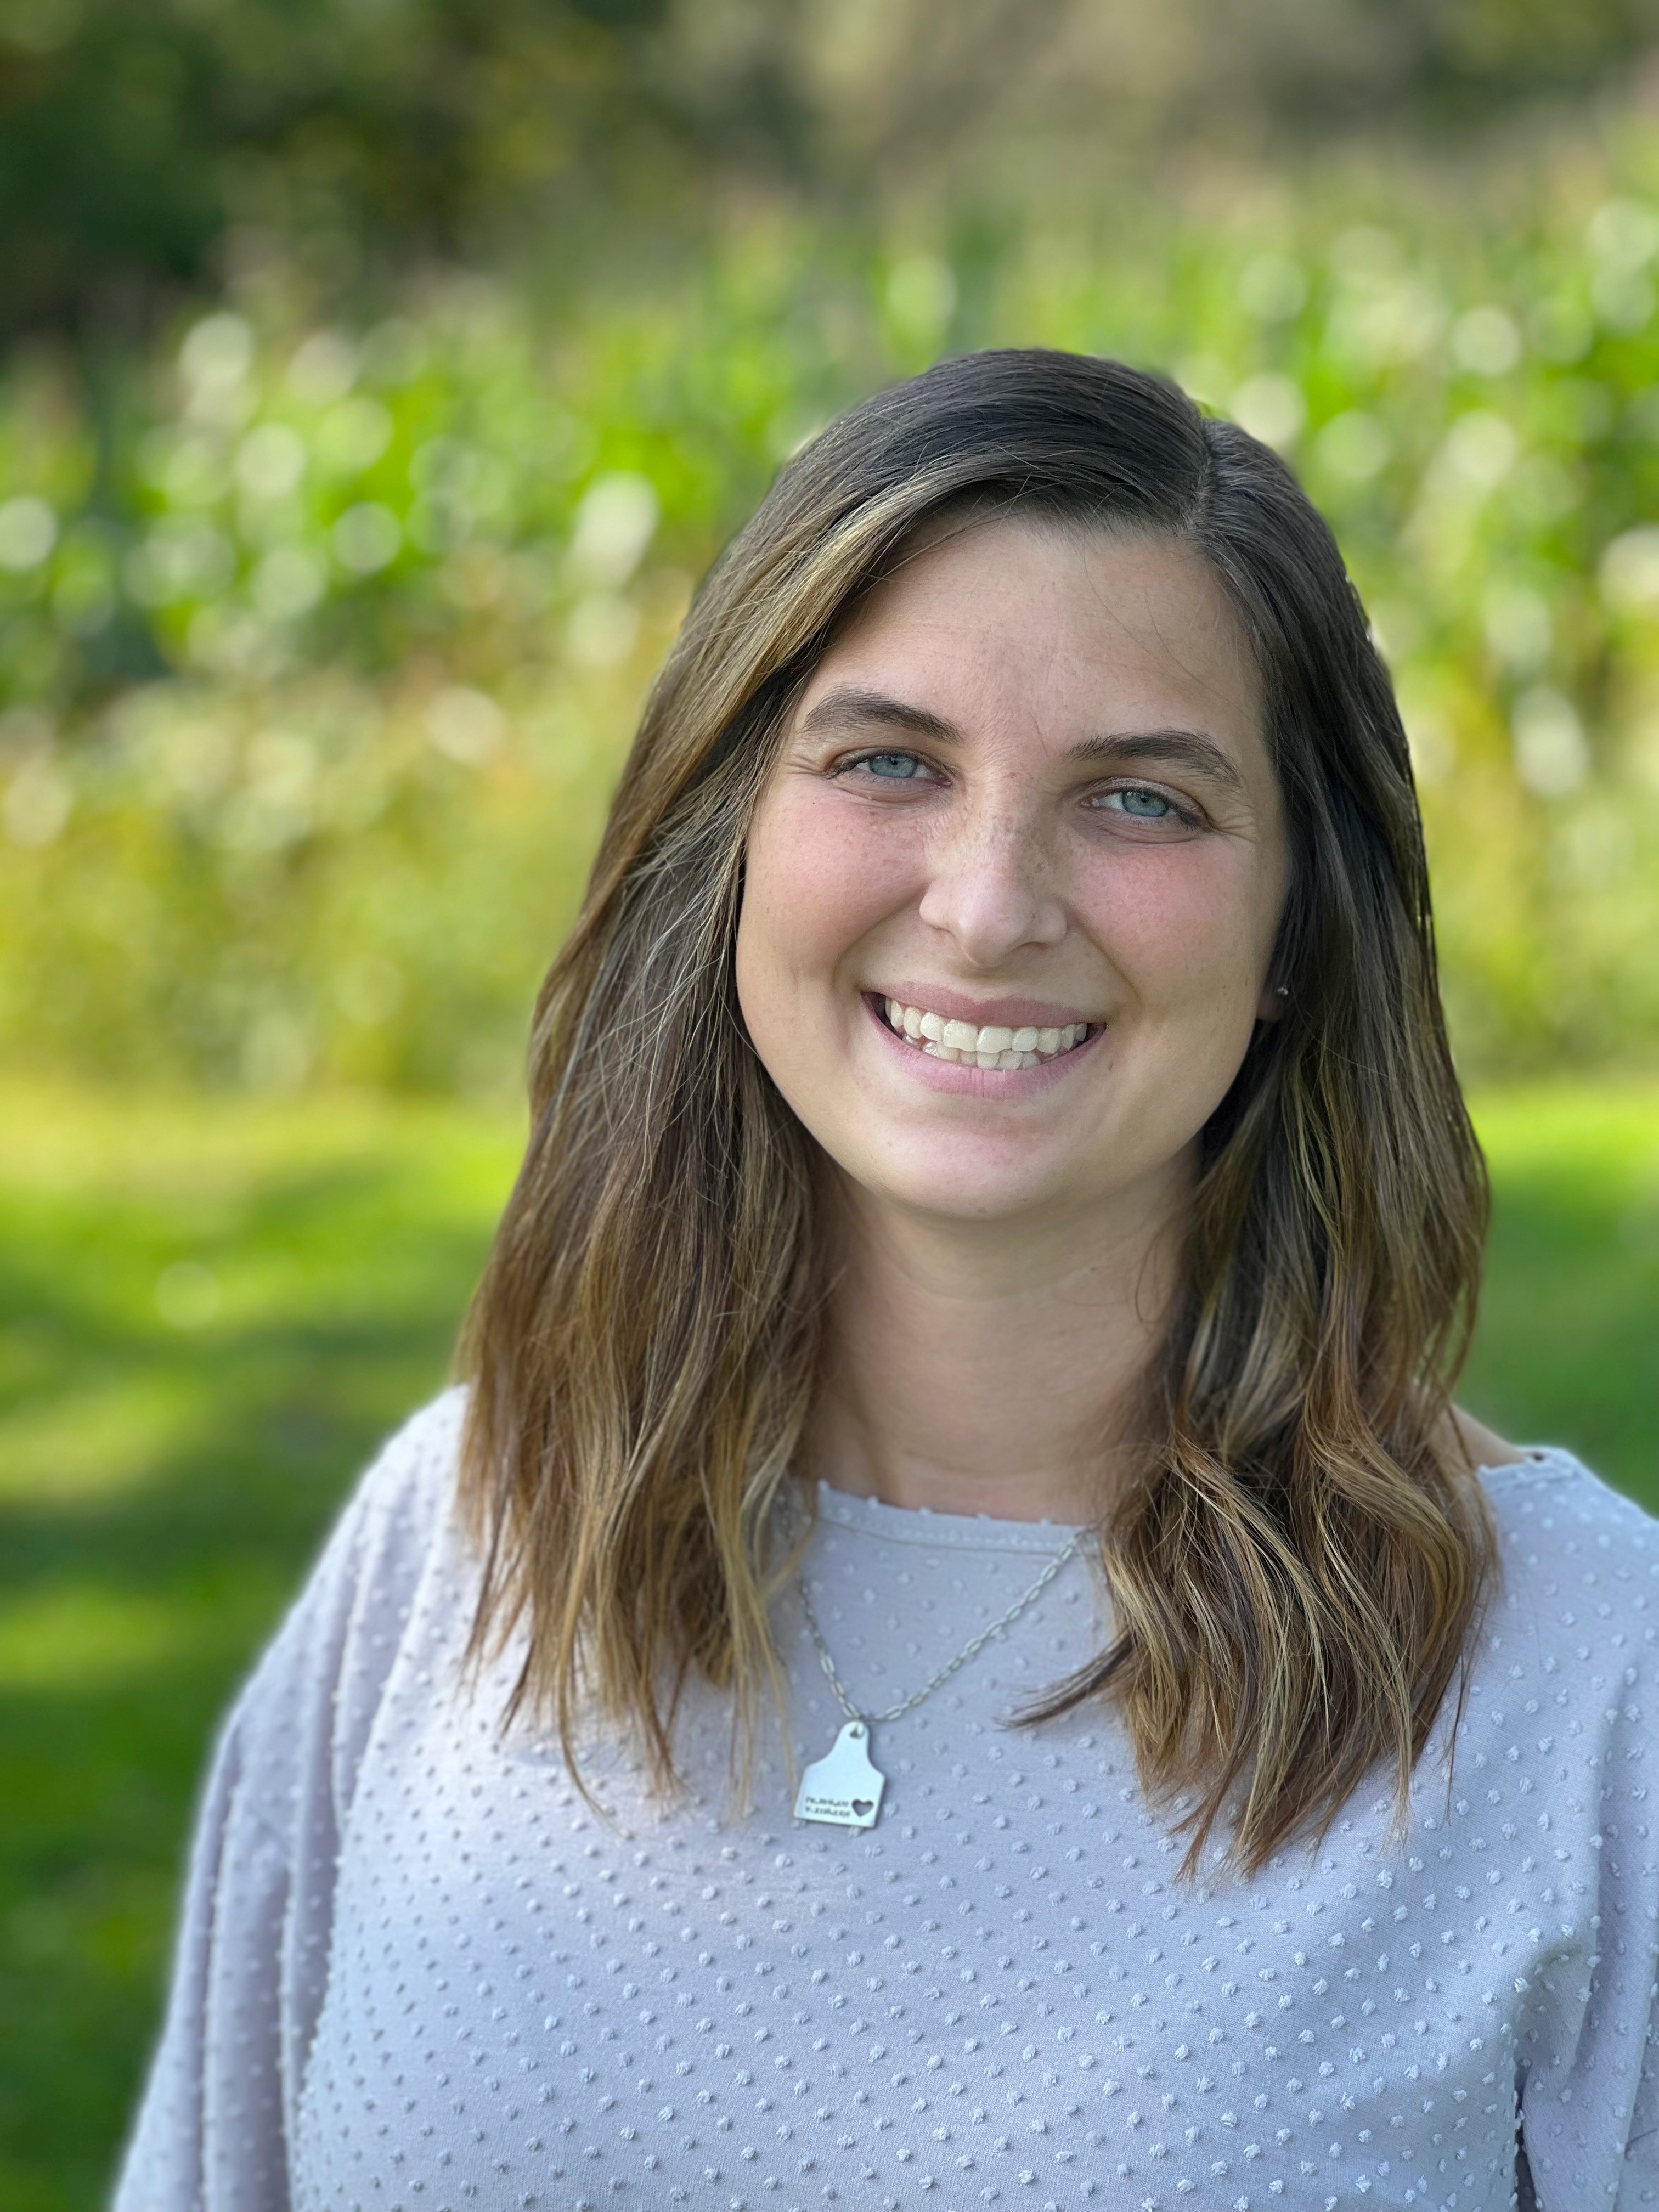 PA BEEF COUNCIL WELCOMES NEW STAFF MEMBER